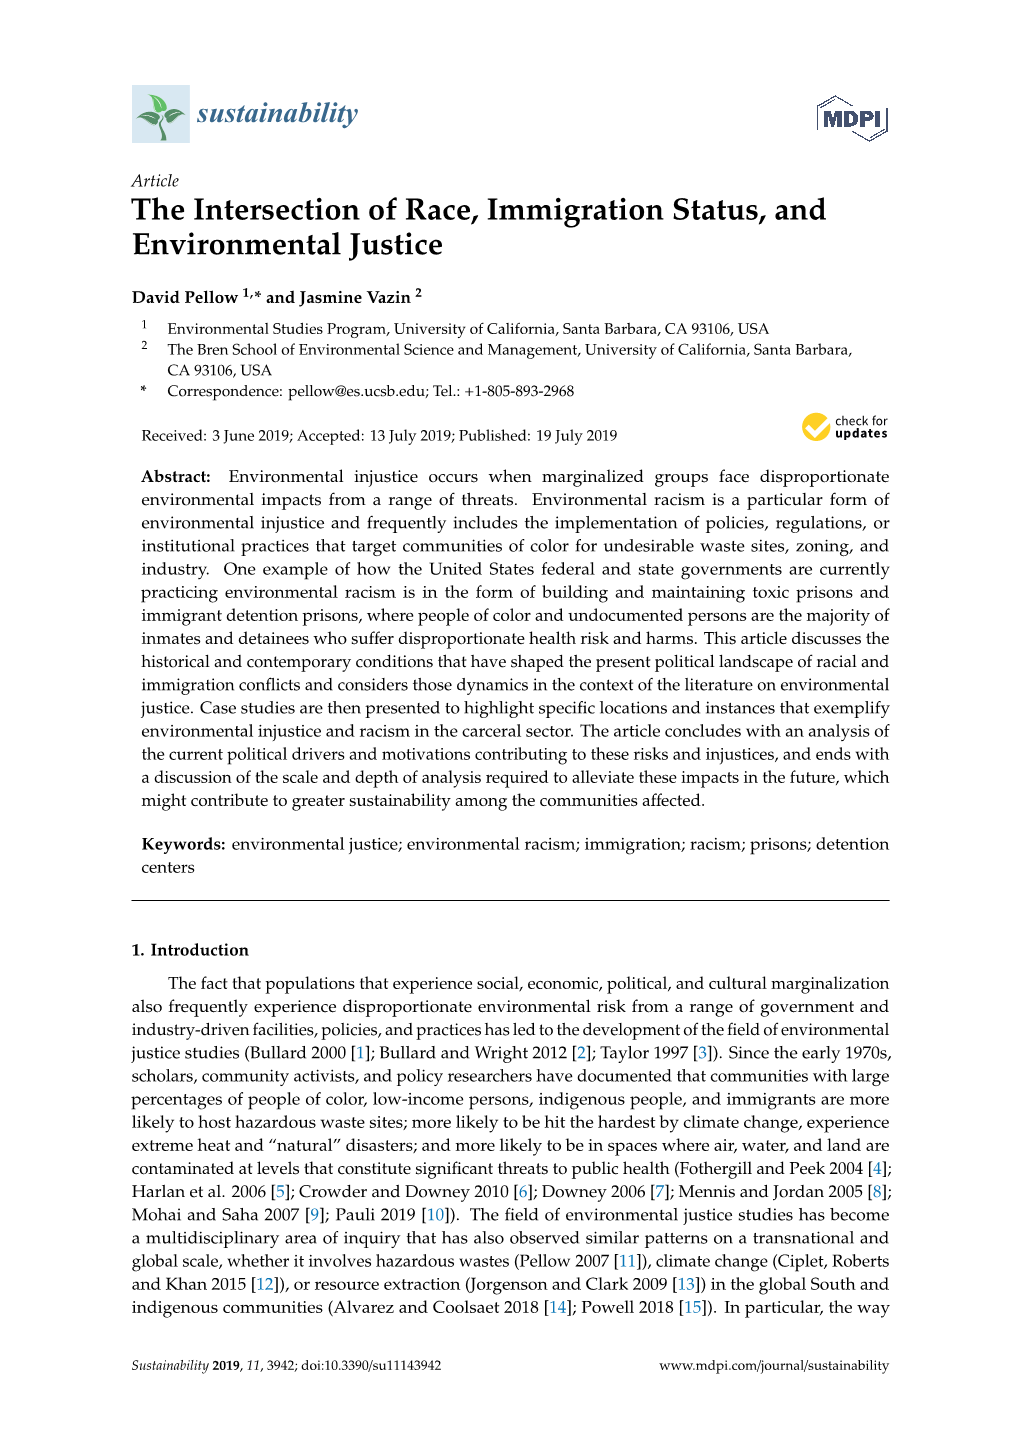 The Intersection of Race, Immigration Status, and Environmental Justice